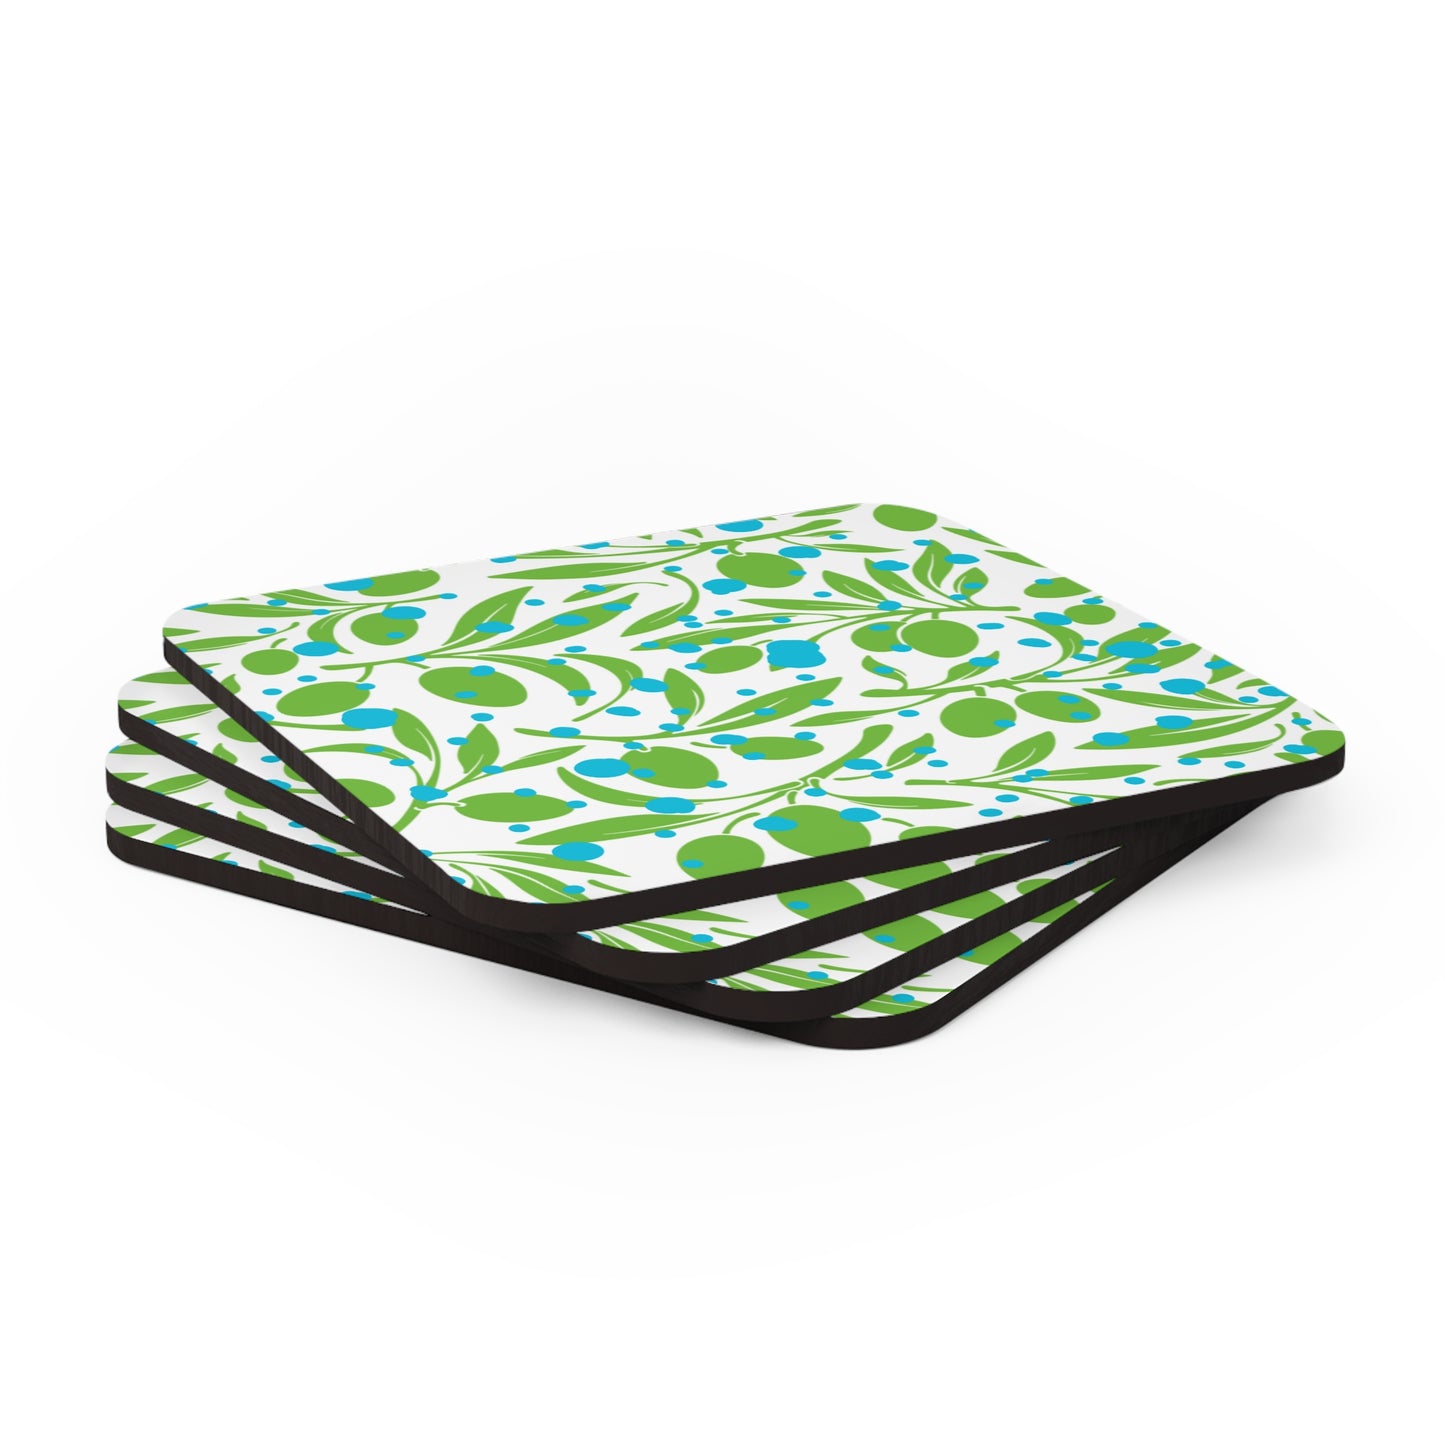 Olive Branches Midcentury Modern Green Blue Decorative Pattern Cocktail Party Entertaining Corkwood Coaster Set